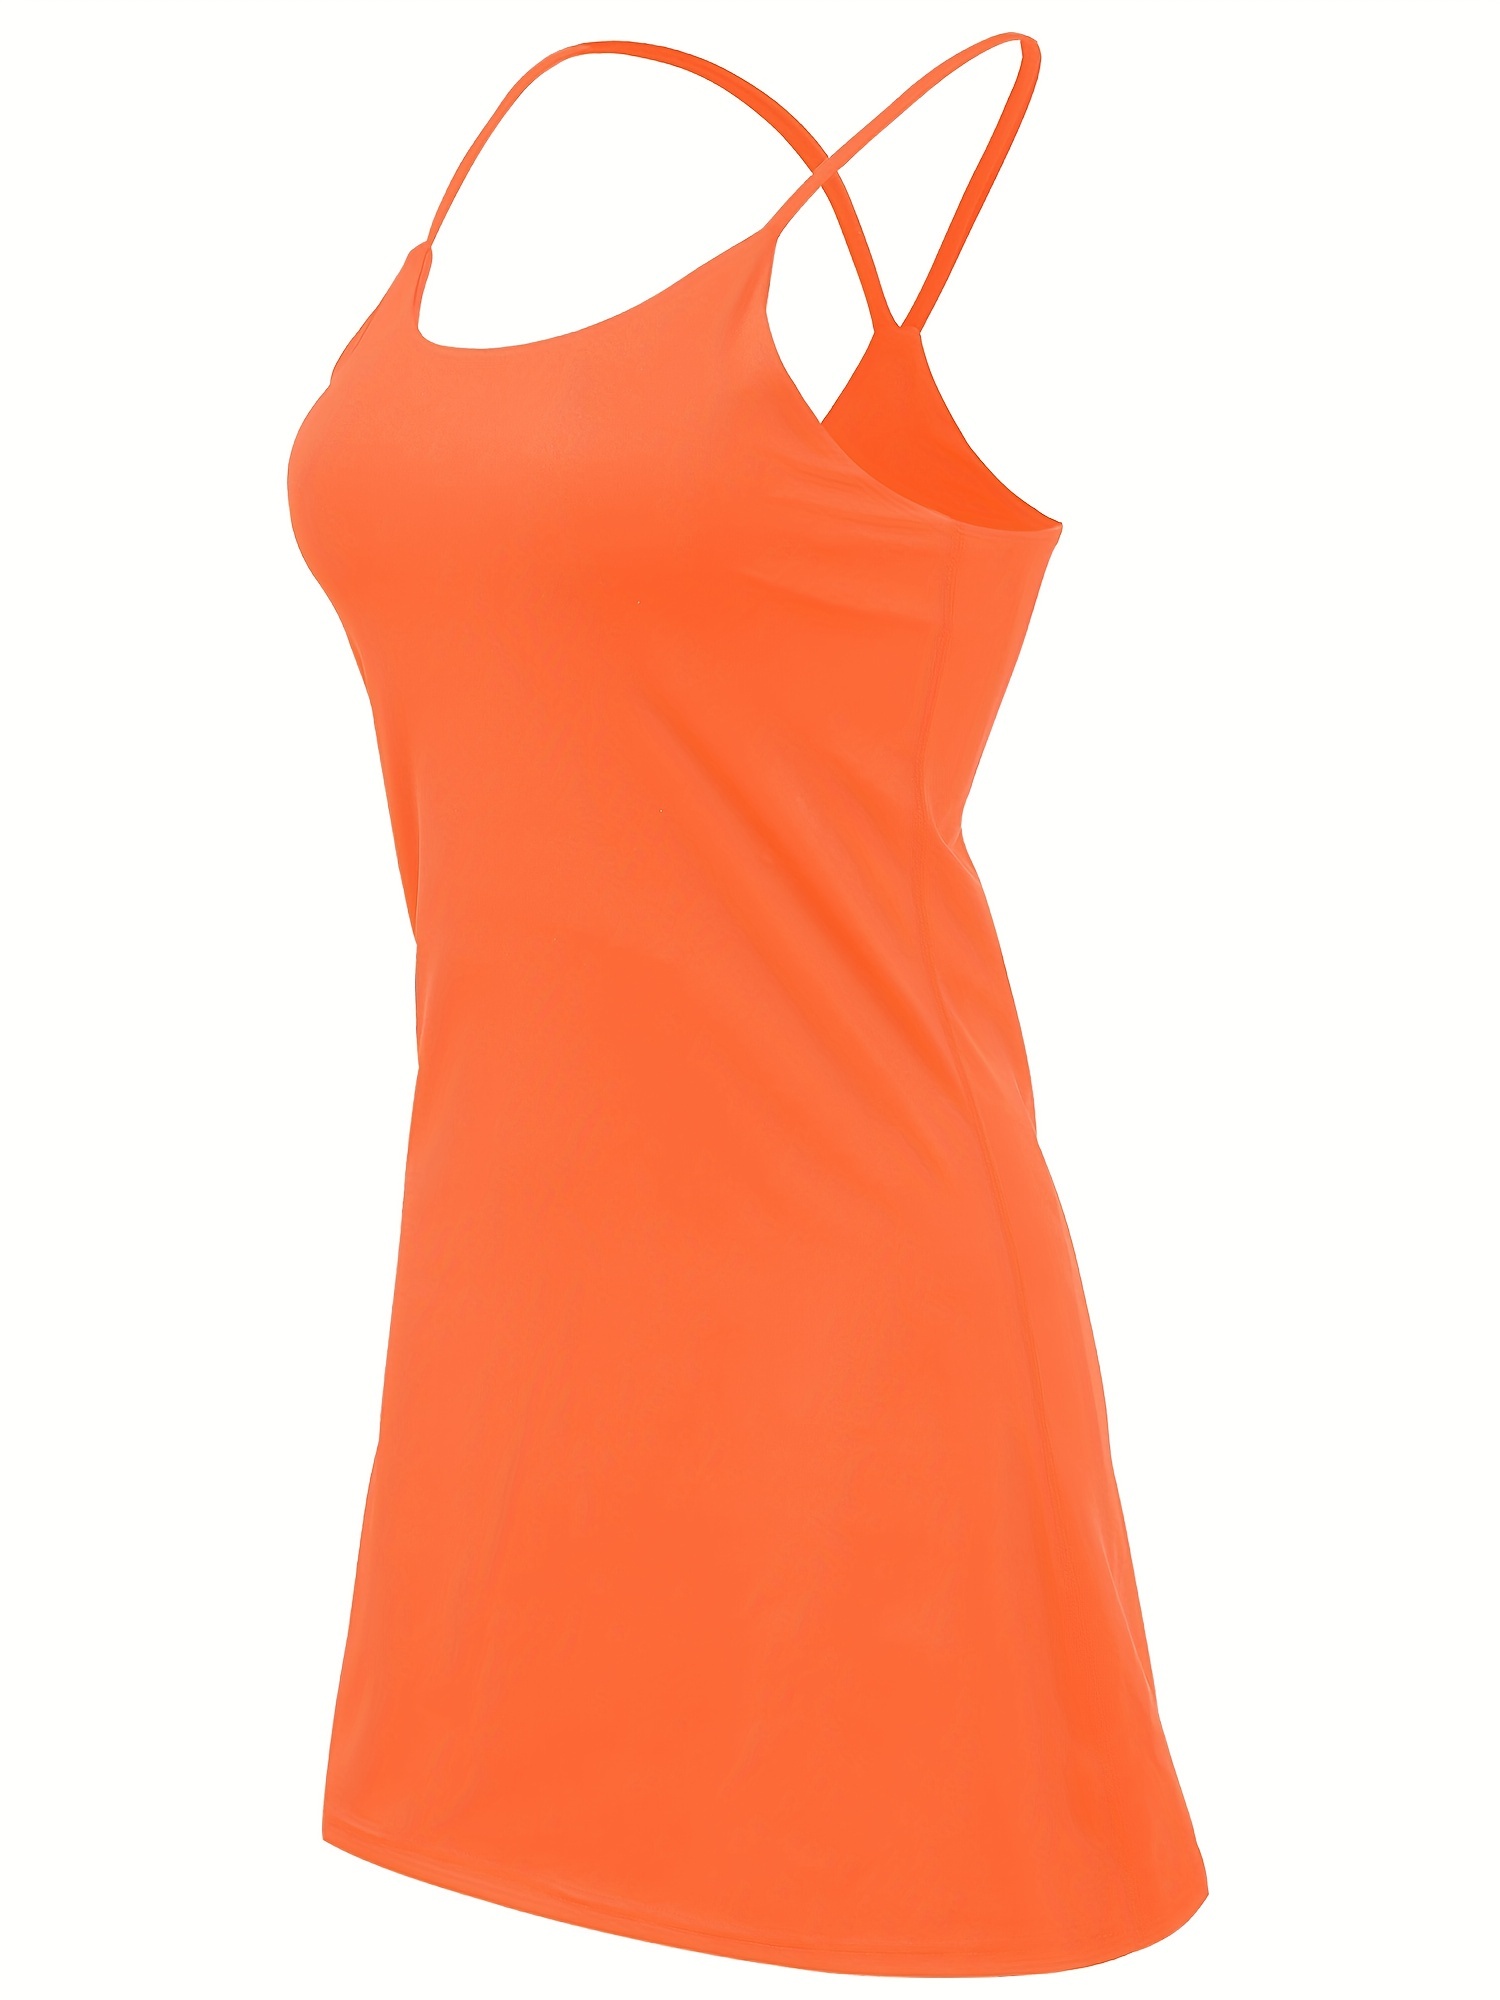  Womens Workout Tennis Dress with Built in Shorts and